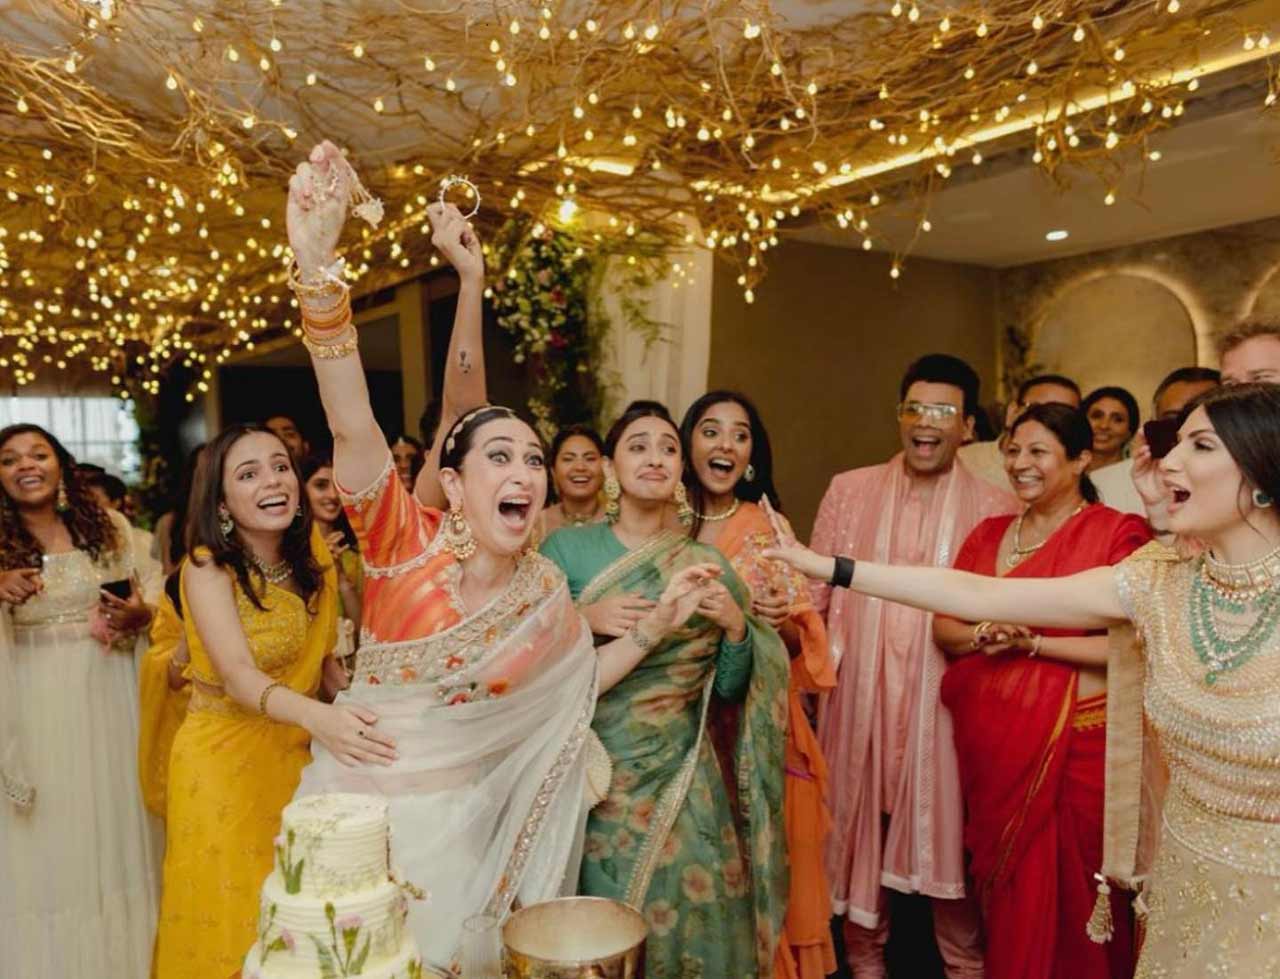 Taking to her Instagram handle, Alia Bhatt also shared several pictures, which proved that the Mehendi ceremony was a fun-filled tale with dance performances and tons of smiles from every corner.